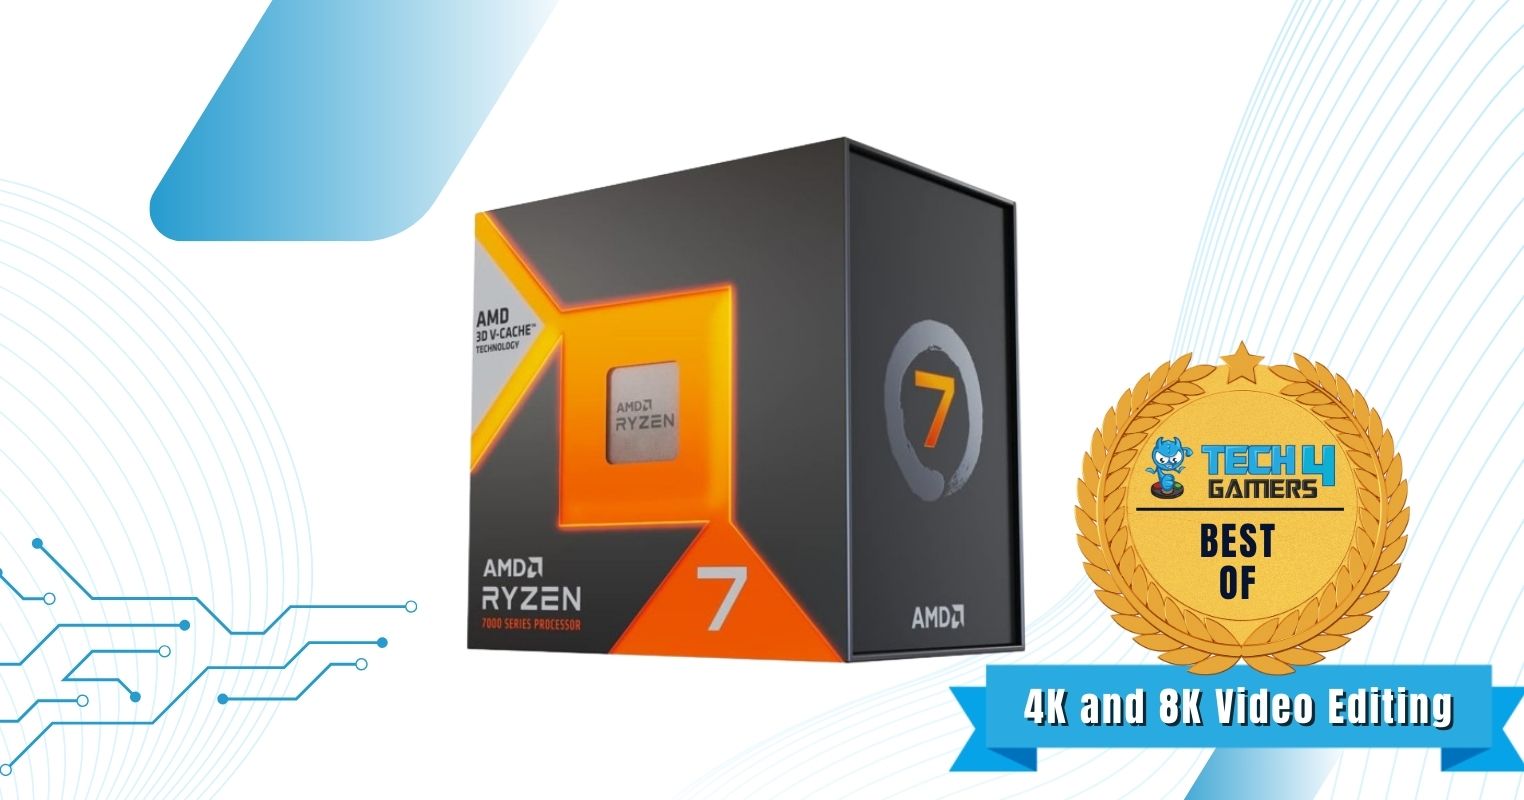 AMD Ryzen 7 7800X3D - Best CPU For 4K And 8K Video Editing